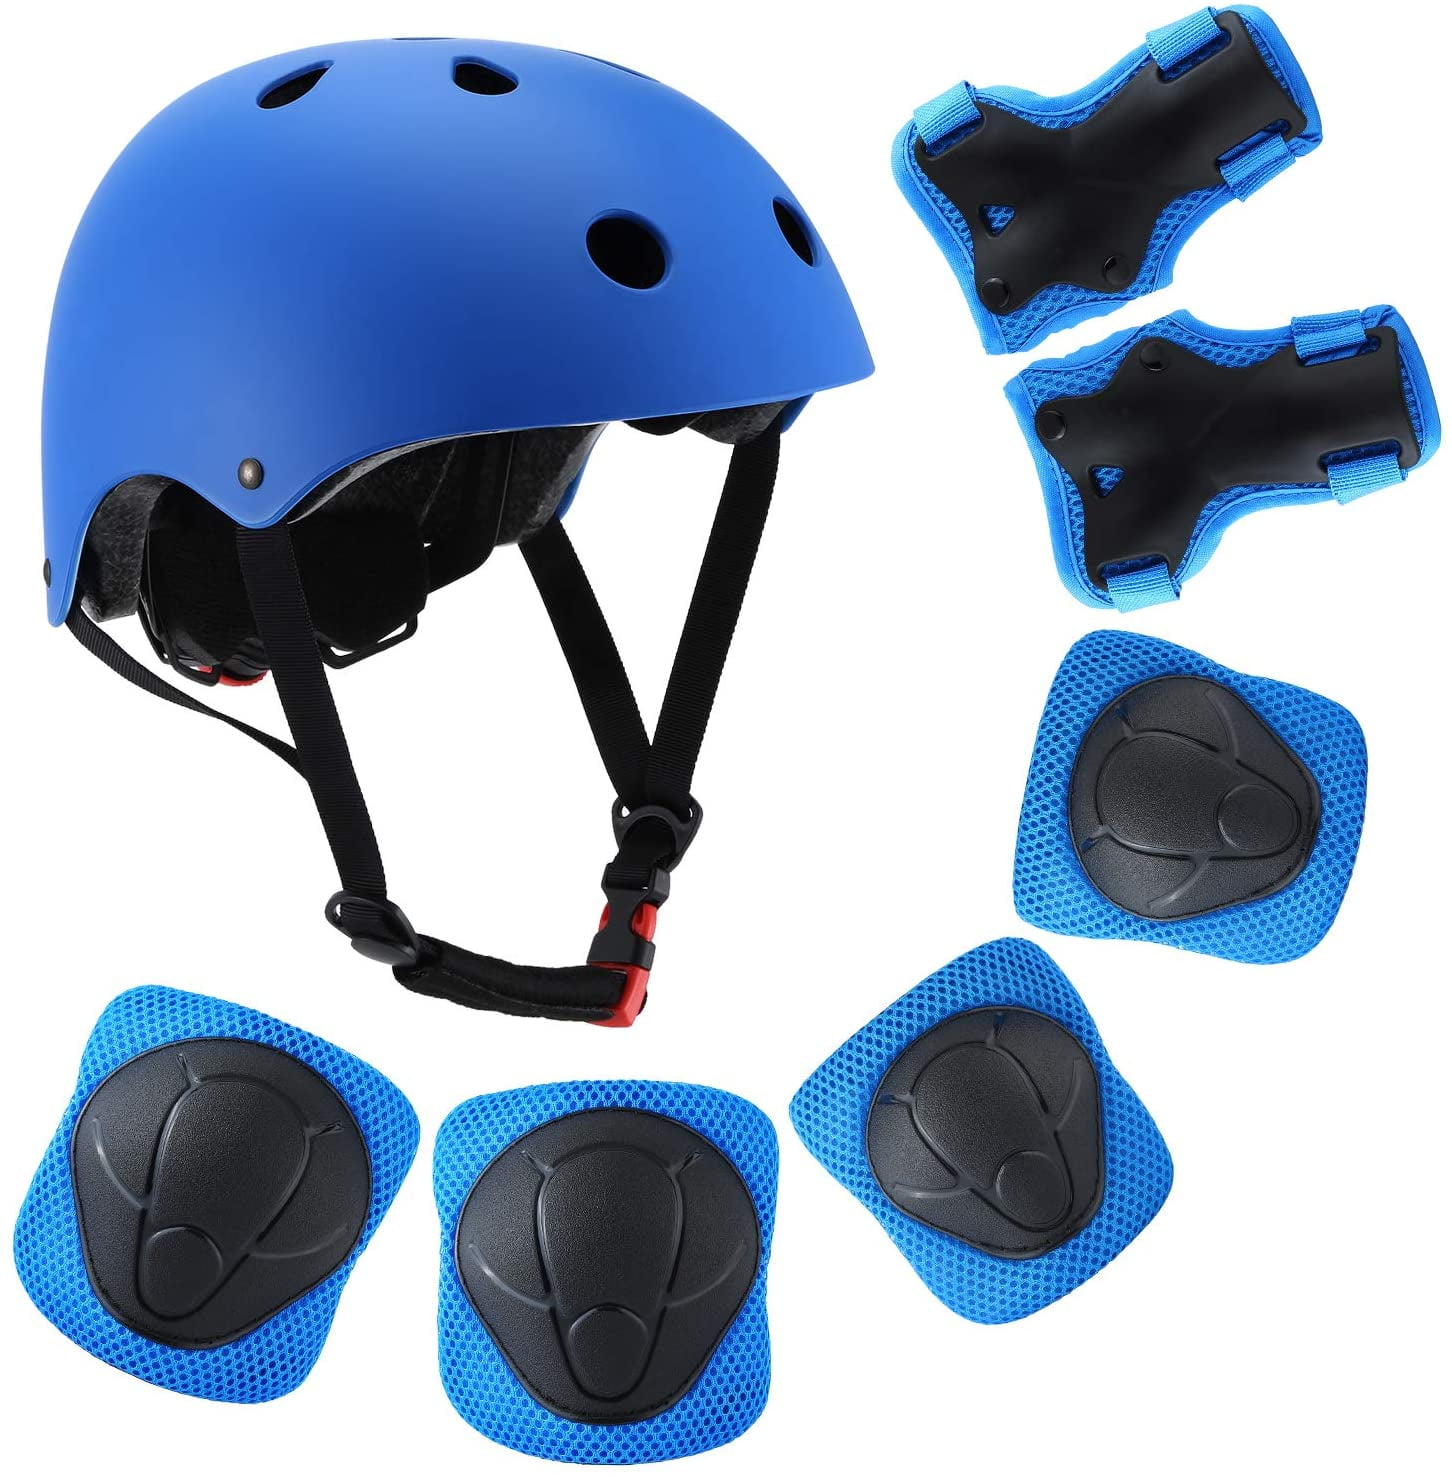 Kids Bike Helmet Recommended Age 3 to 8 For Skateboards BMX and Stunt Scooter 